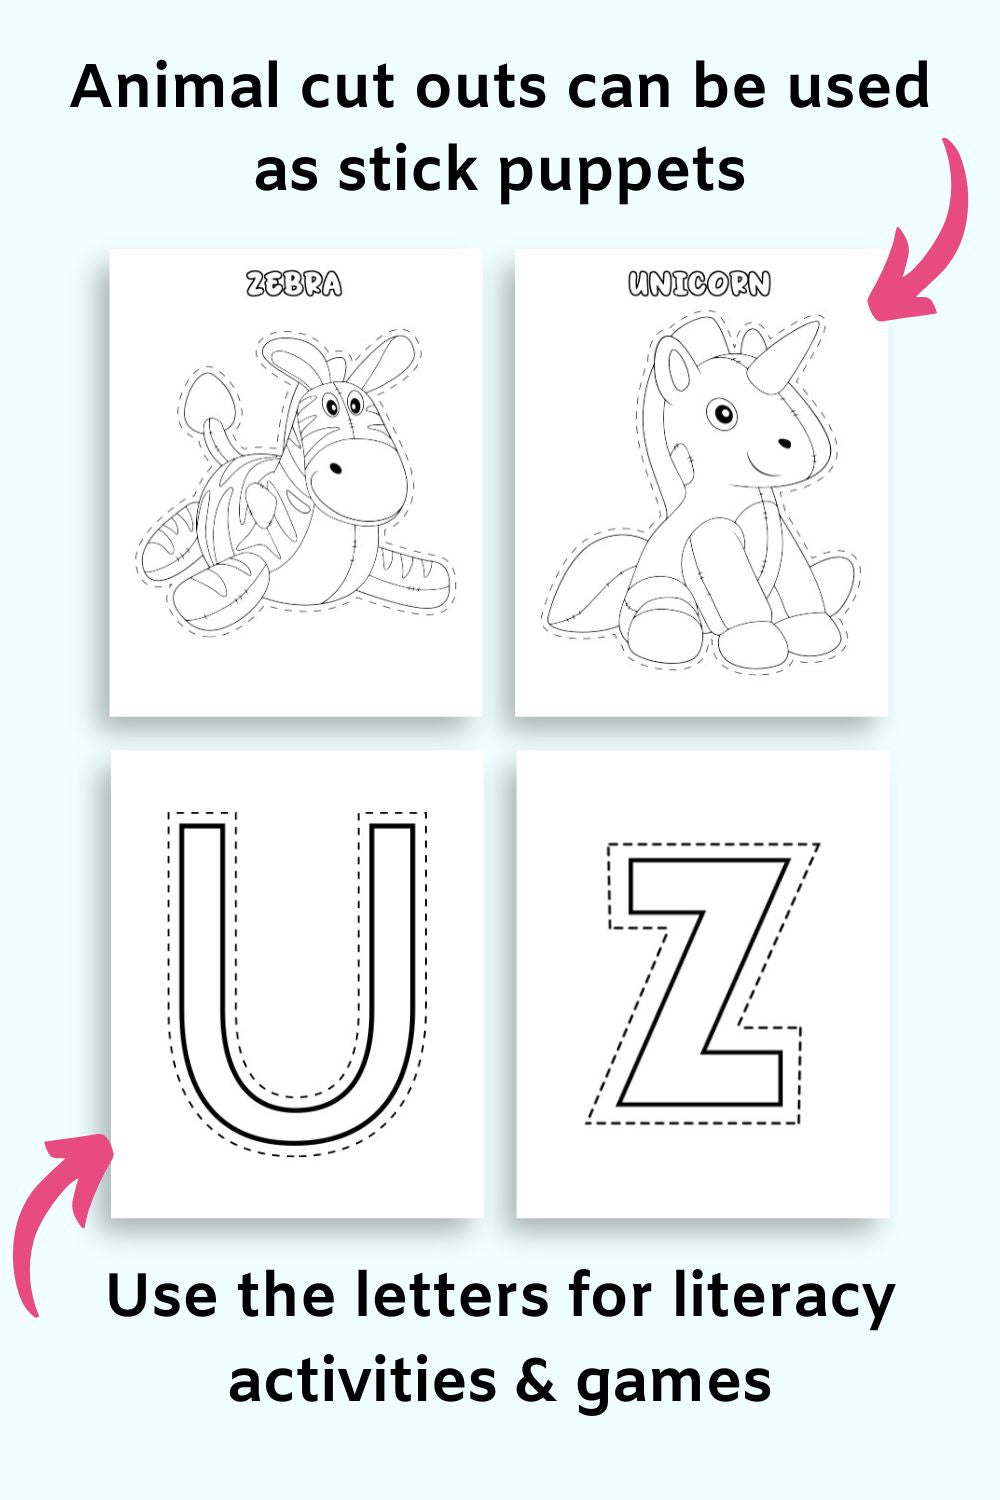 Text "animal cut outs can be used as stick puppets" and "use the letters for literacy activities and games" with a zebra, a unicorn, and the letters U and Z